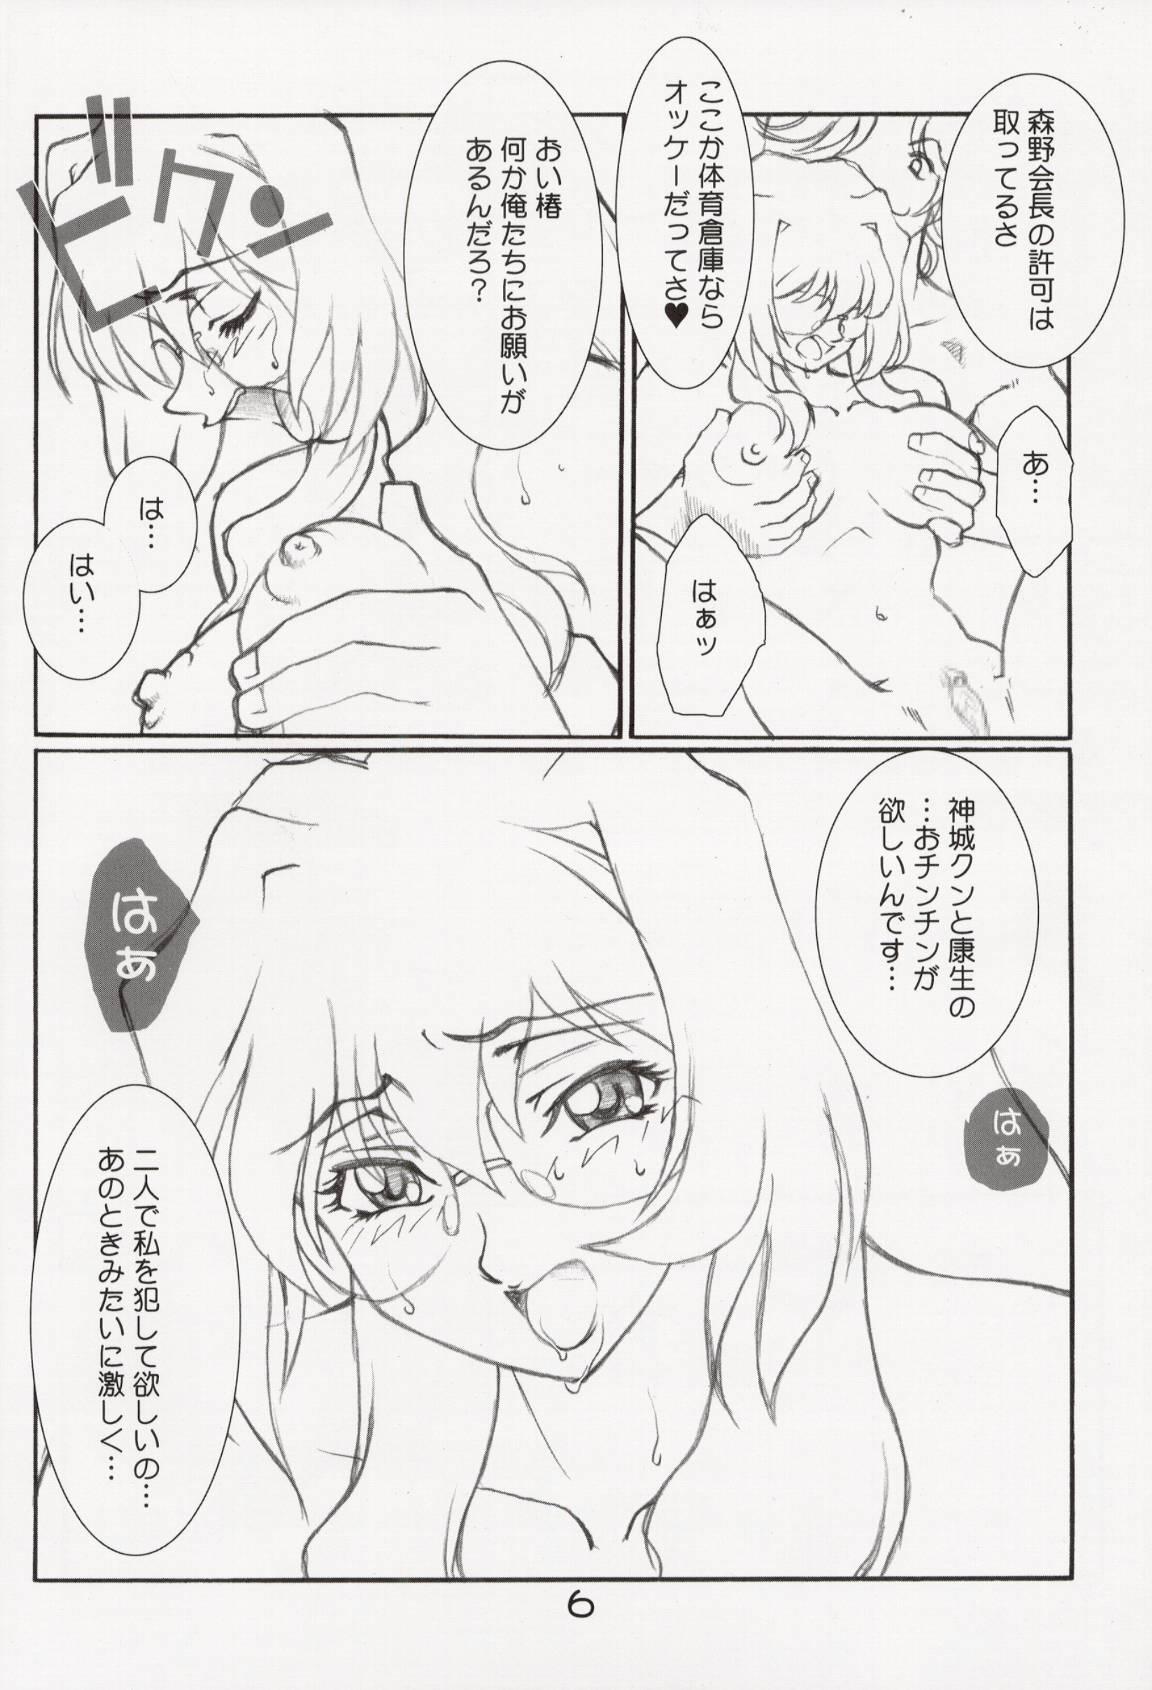 Australian Sudden Onegai Twins SYNDROME - Onegai twins First Time - Page 7